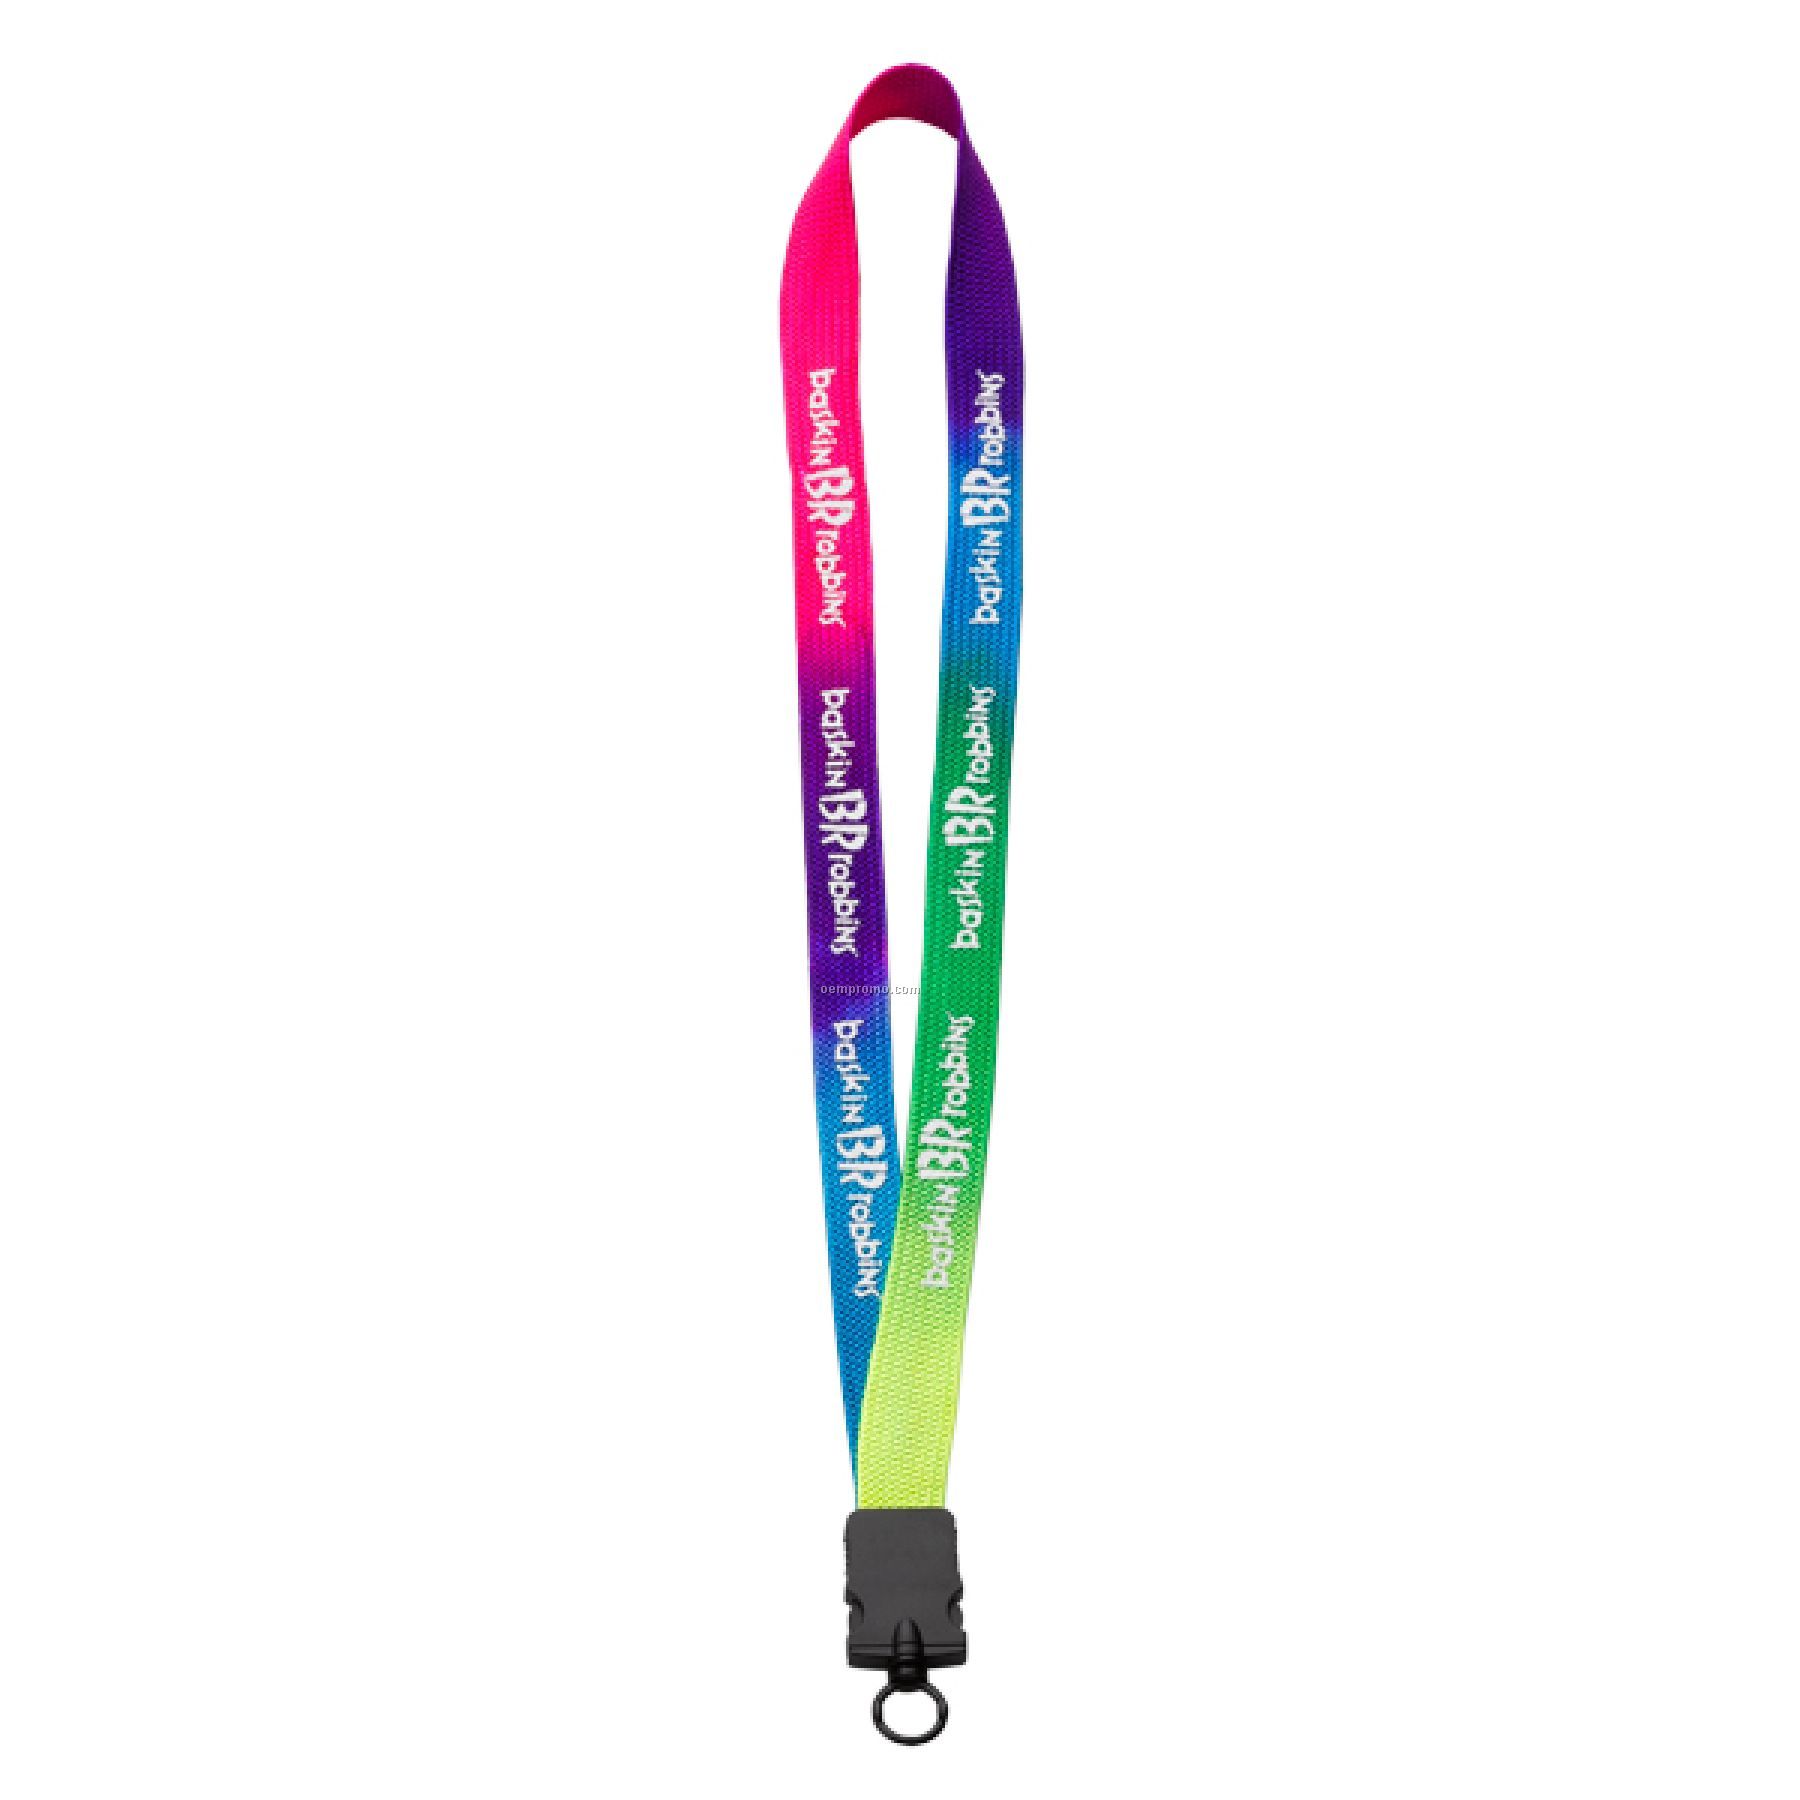 3/4" Tie Dye Lanyard With Plastic Snap Buckle Release & O-ring